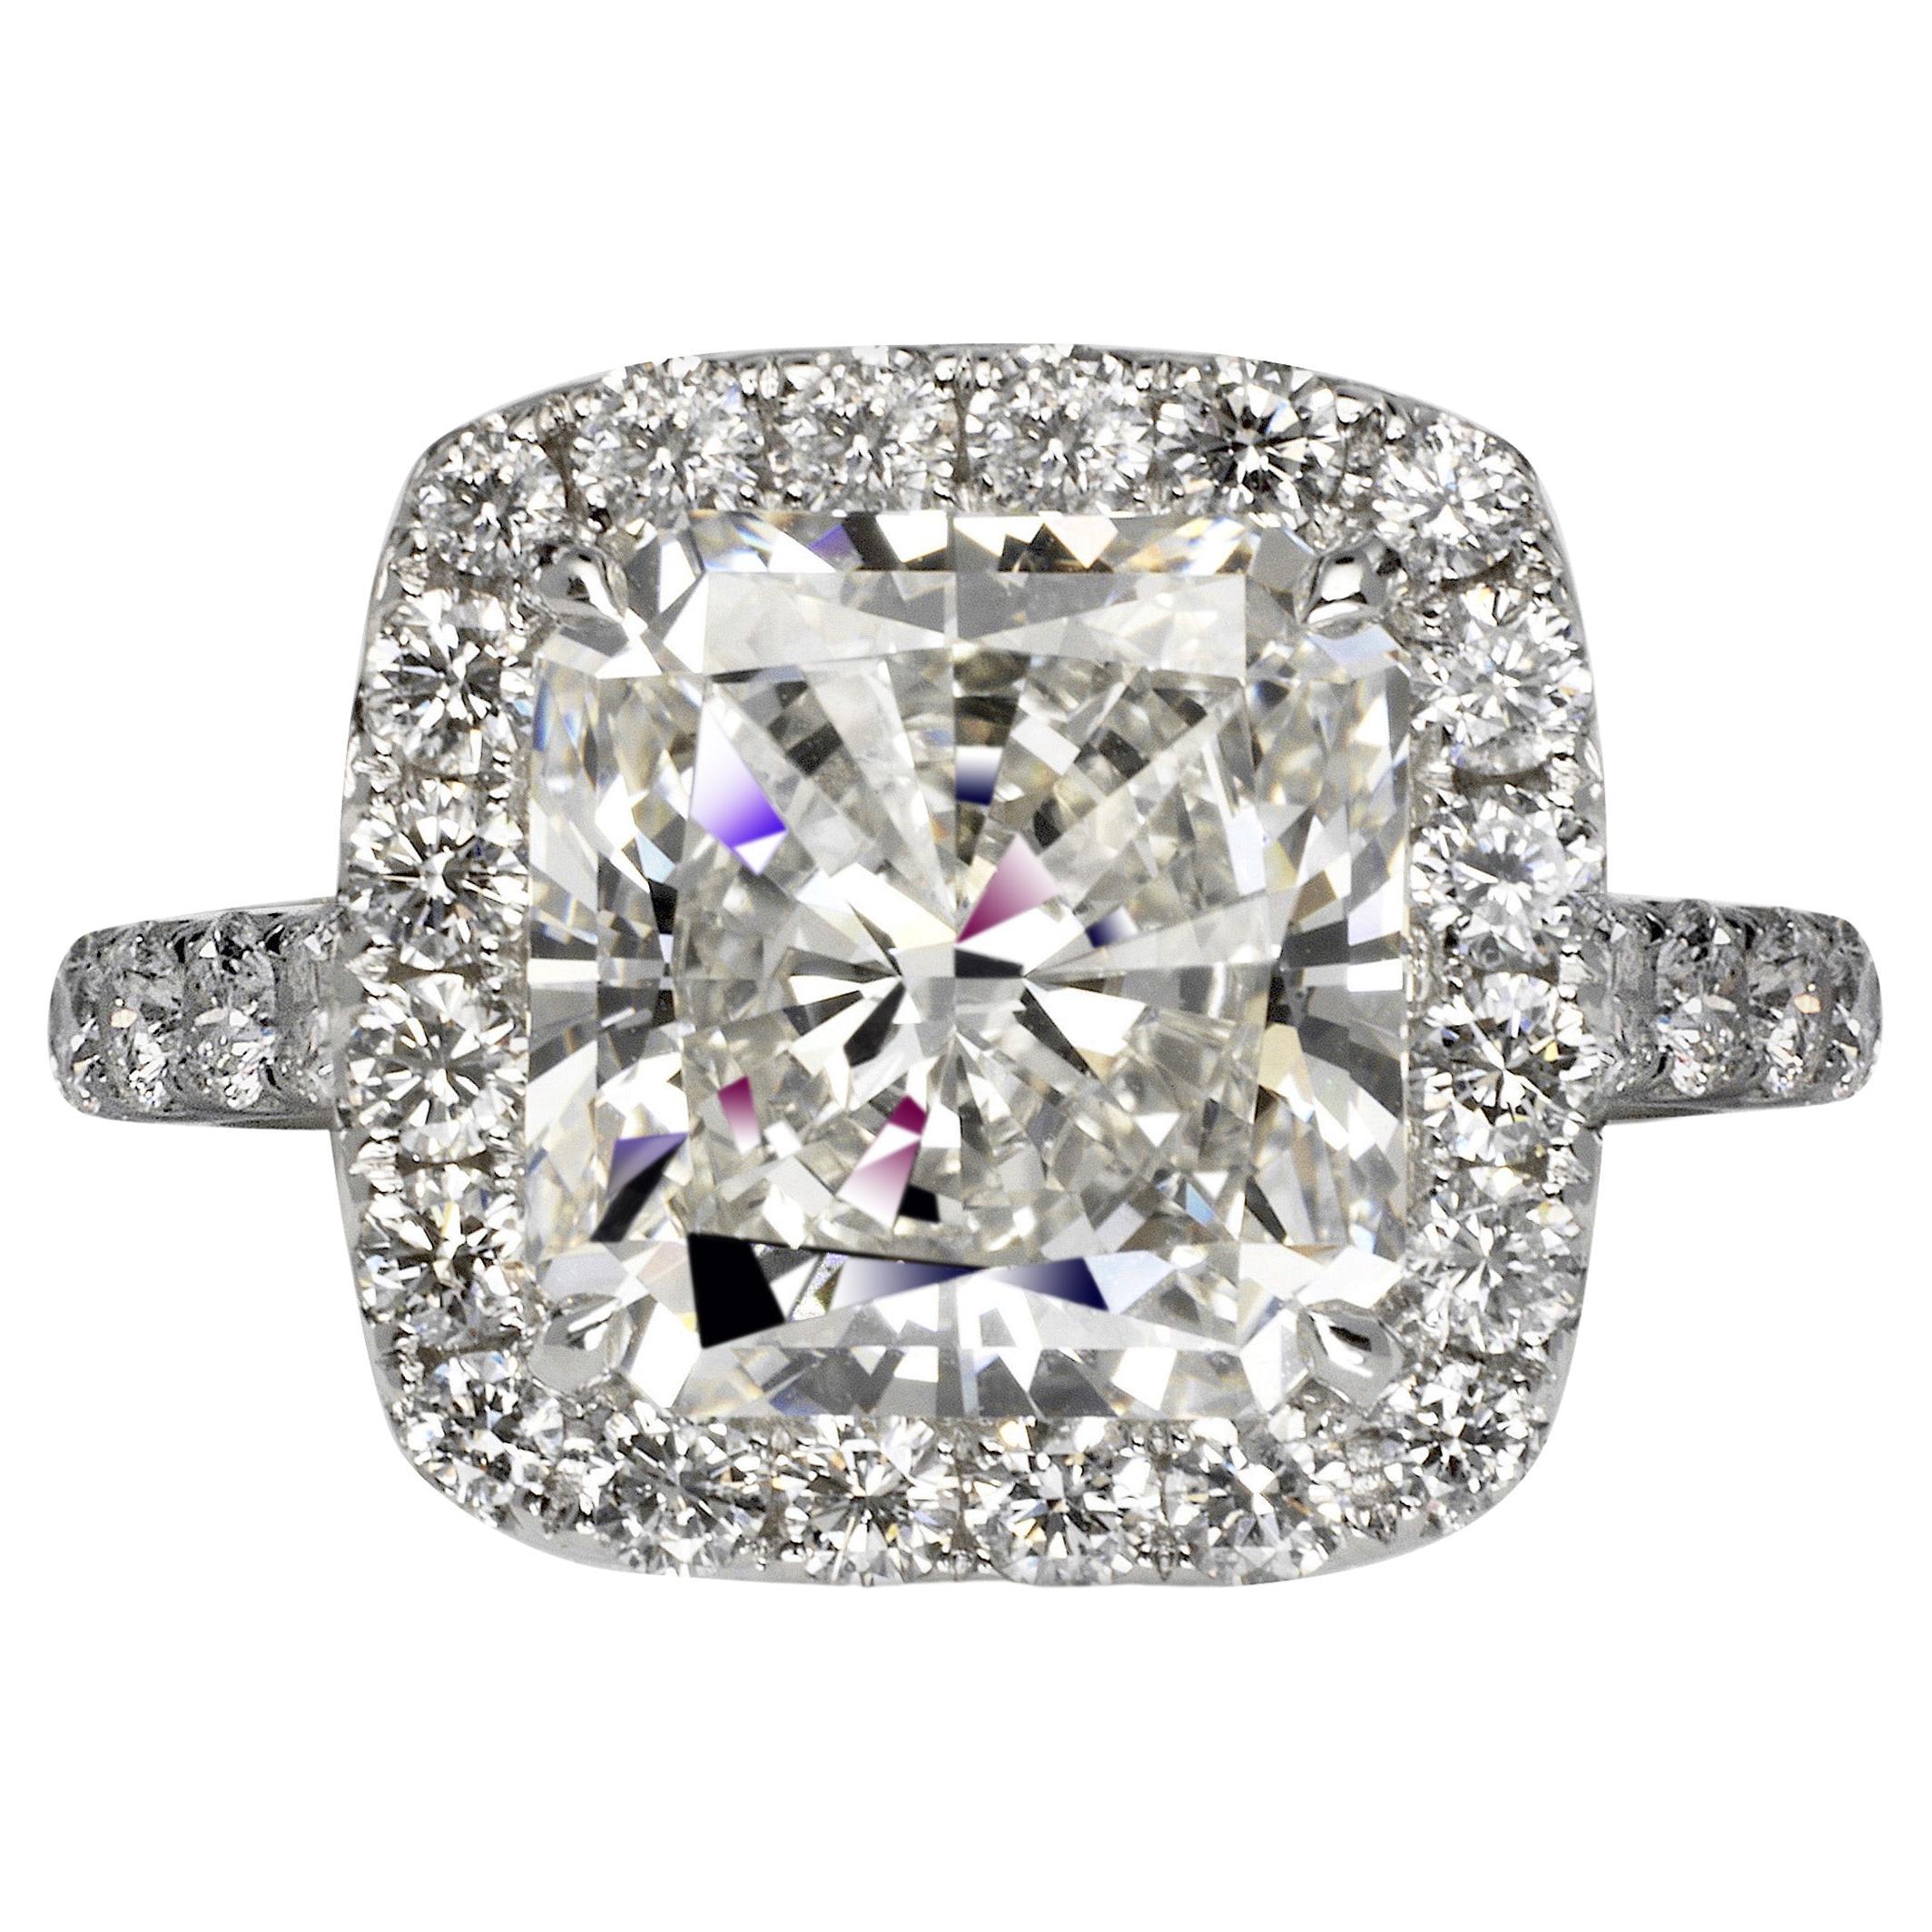 7 Carat Radiant Cut Diamond Engagement Ring GIA Certified I VVS1 For Sale